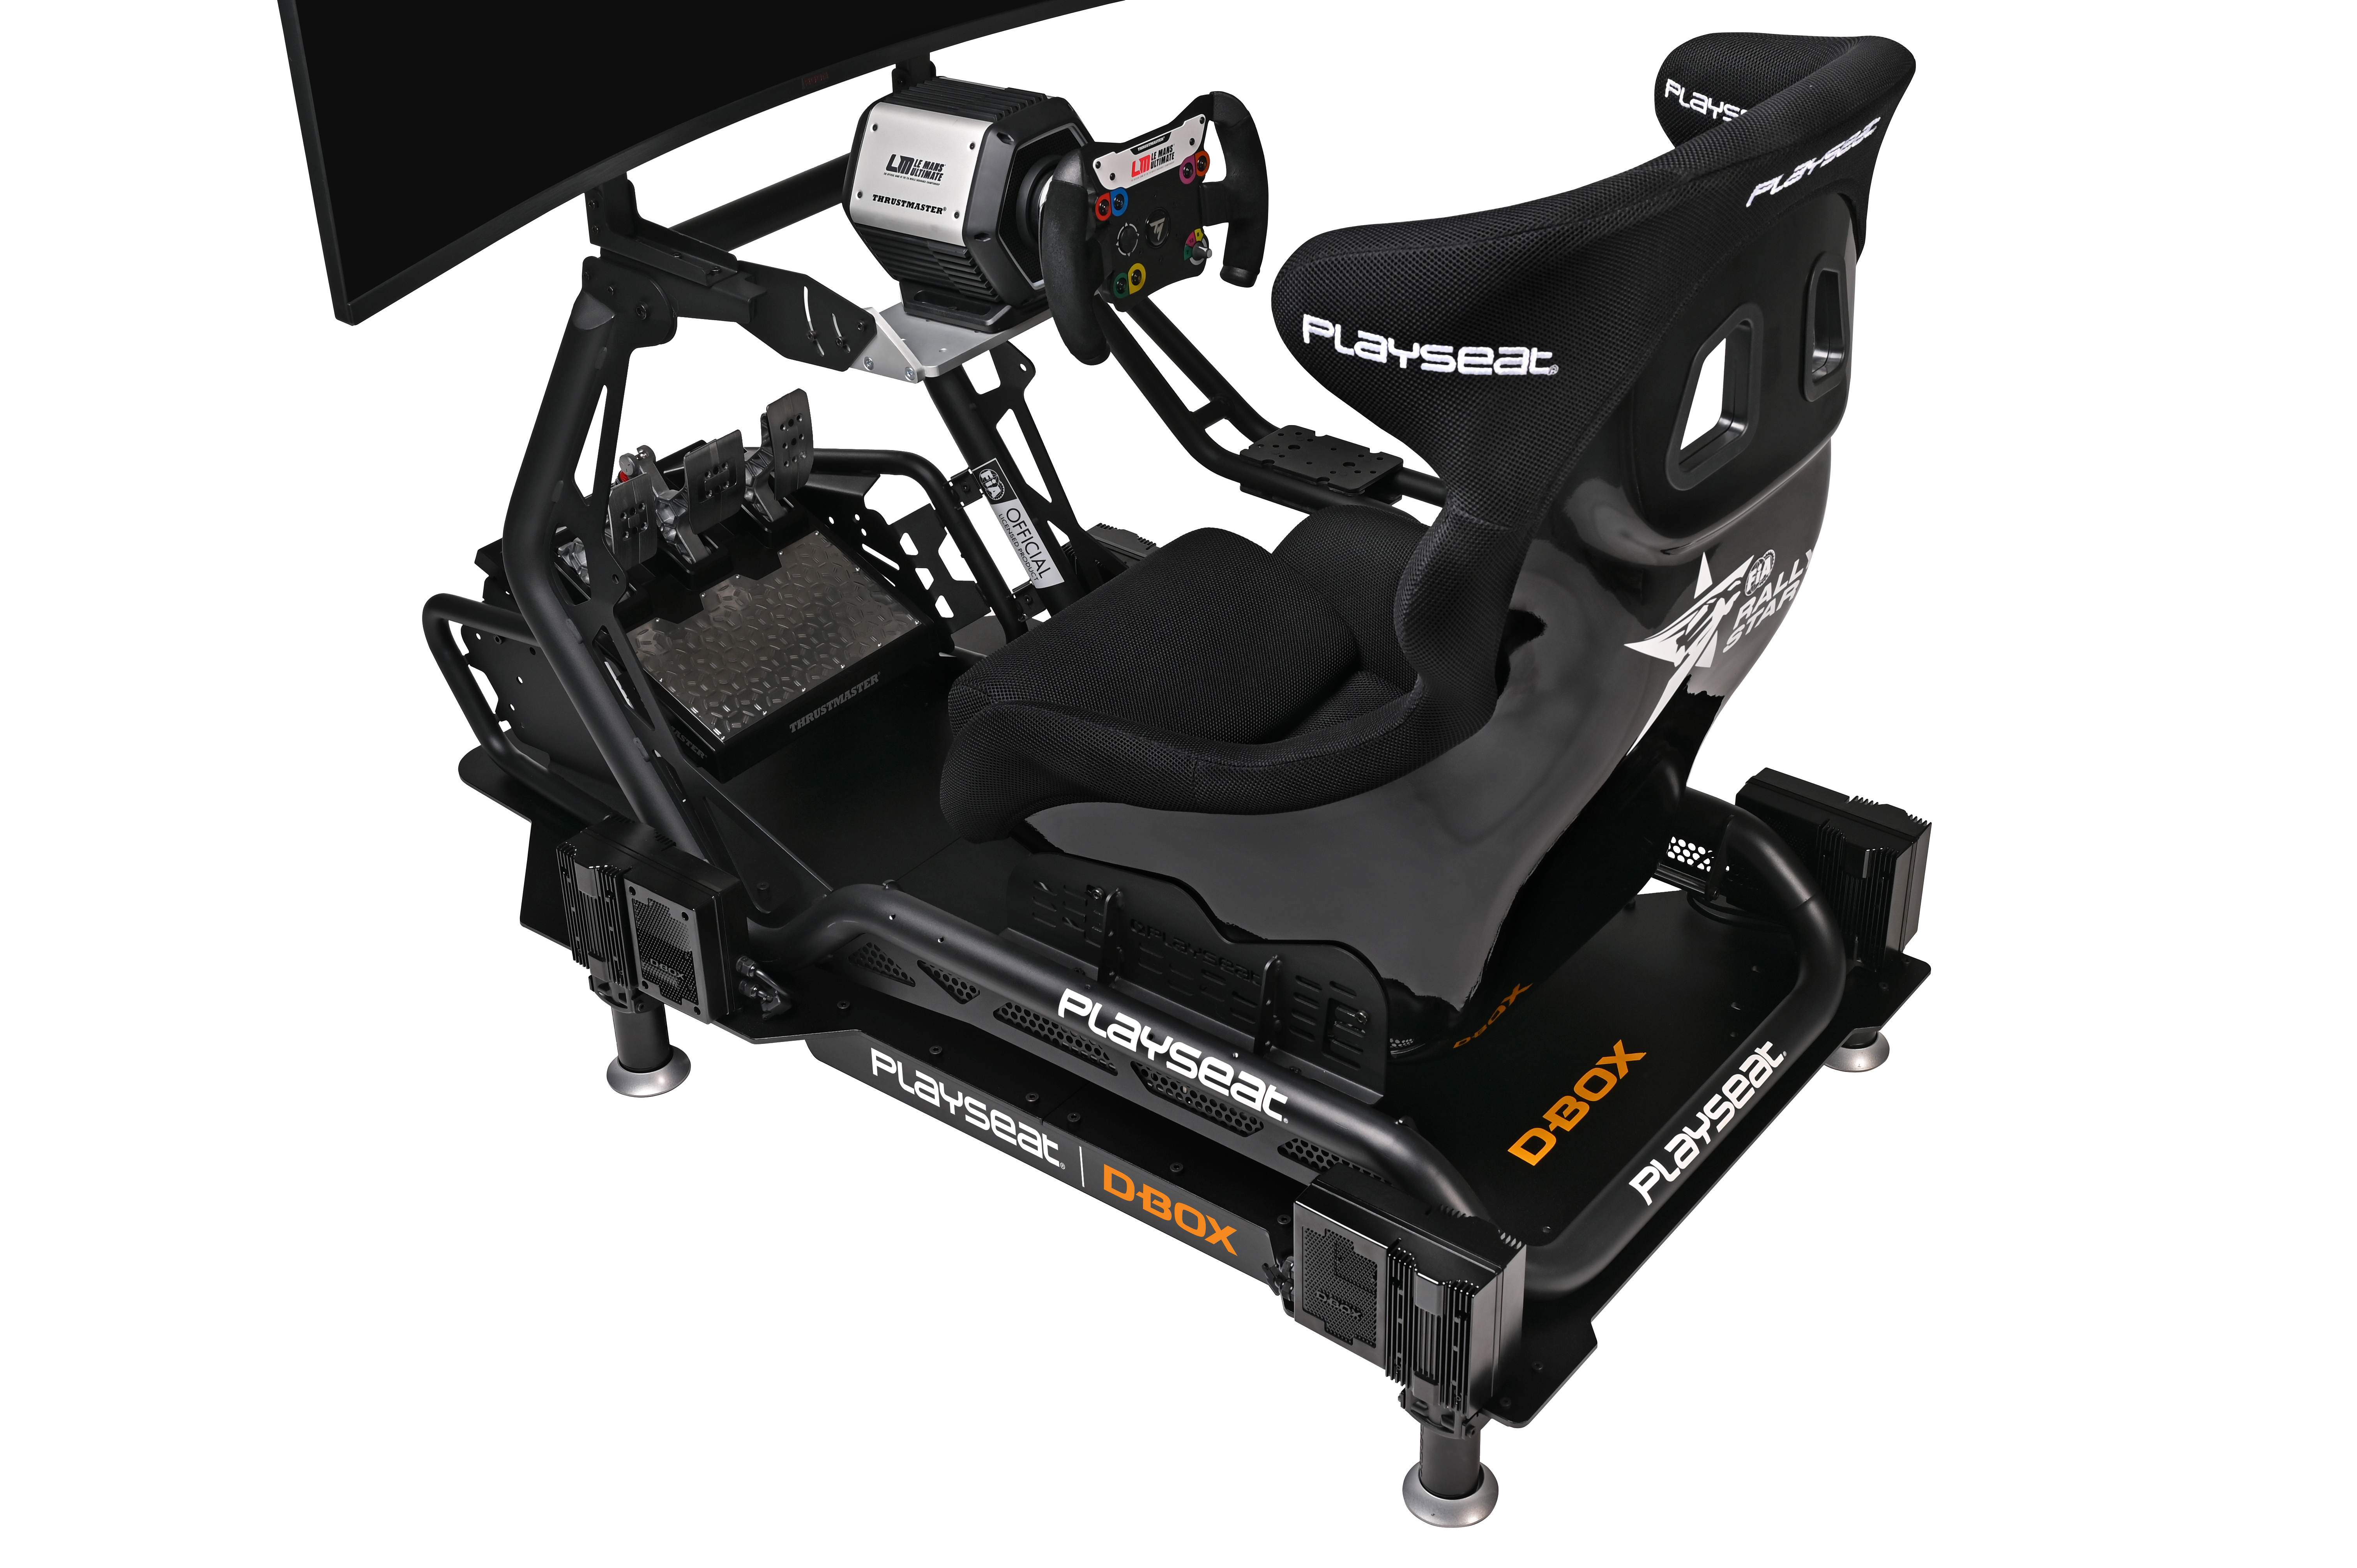 D-BOX partners with Playseat®, a global leader and pioneer